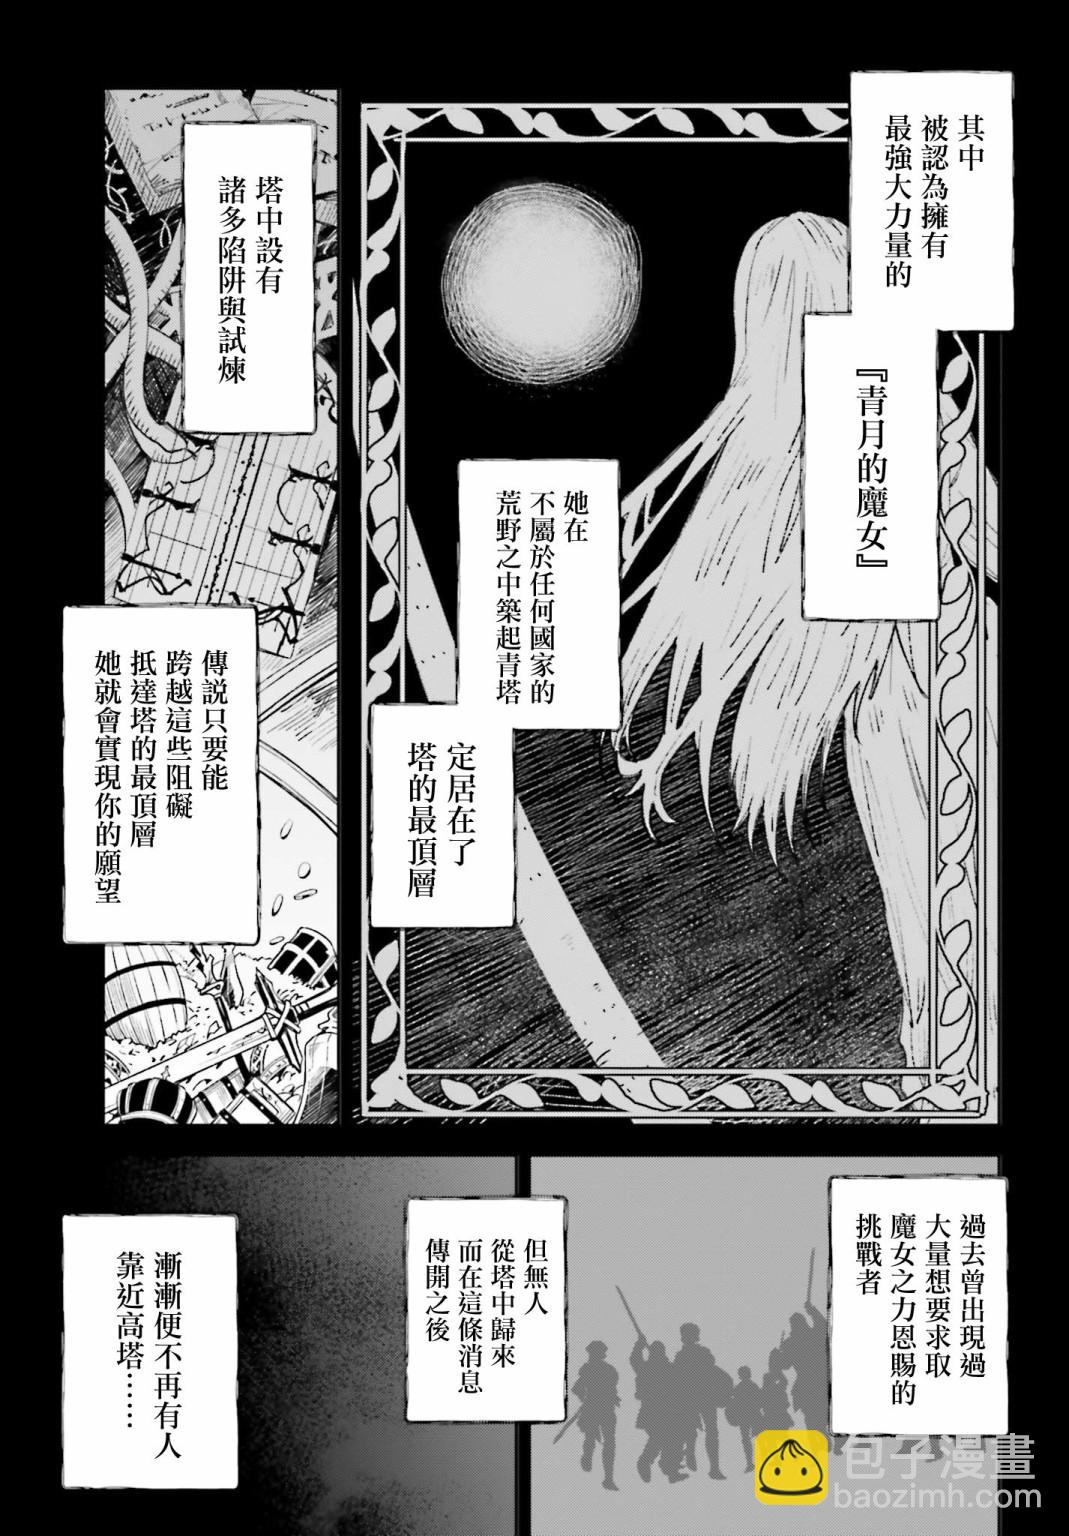 Unnamed Memory - 第01話(1/2) - 3